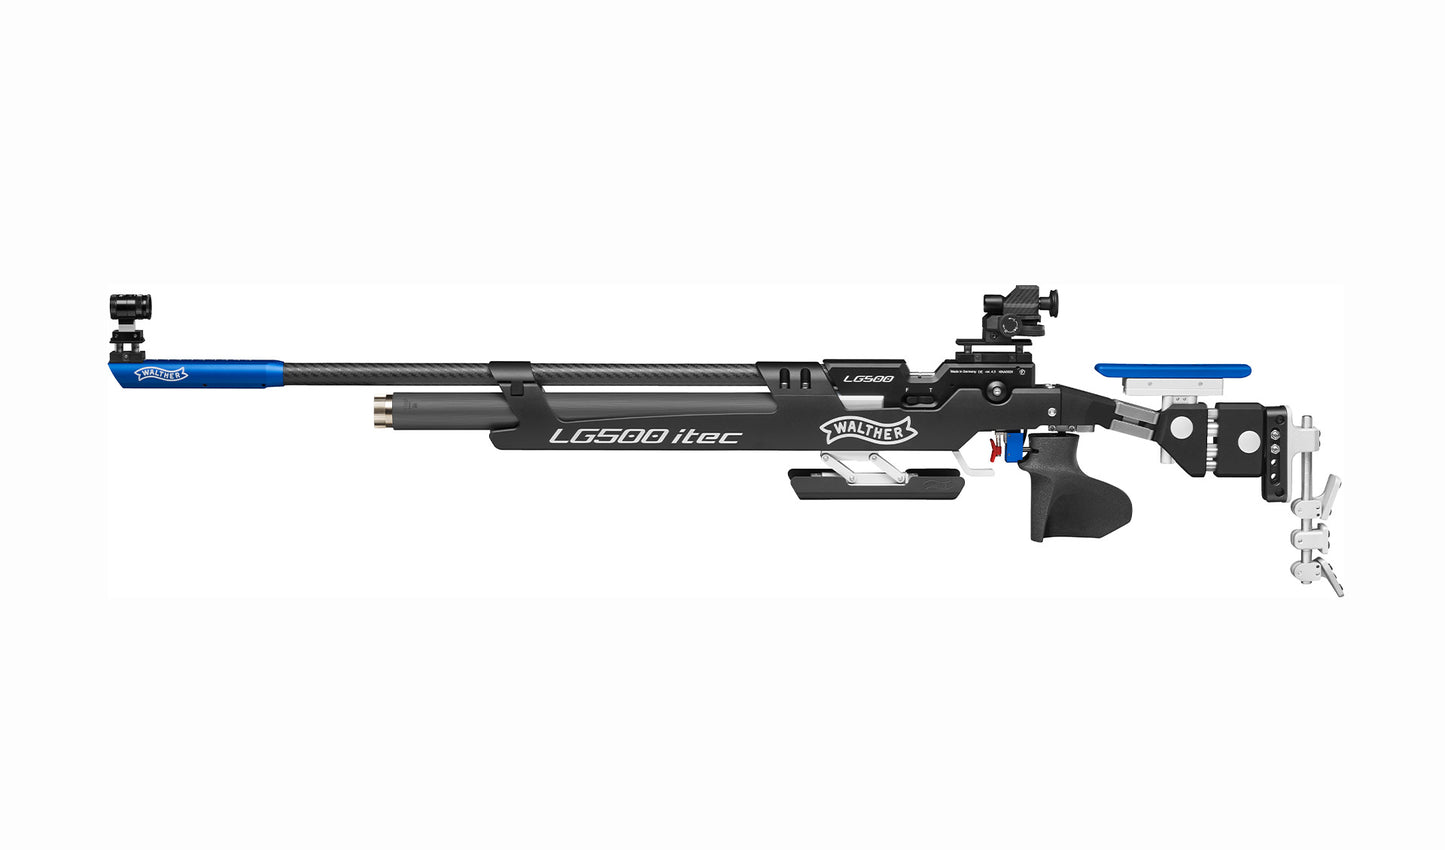 AIR RIFLE - Walther LG500 itec